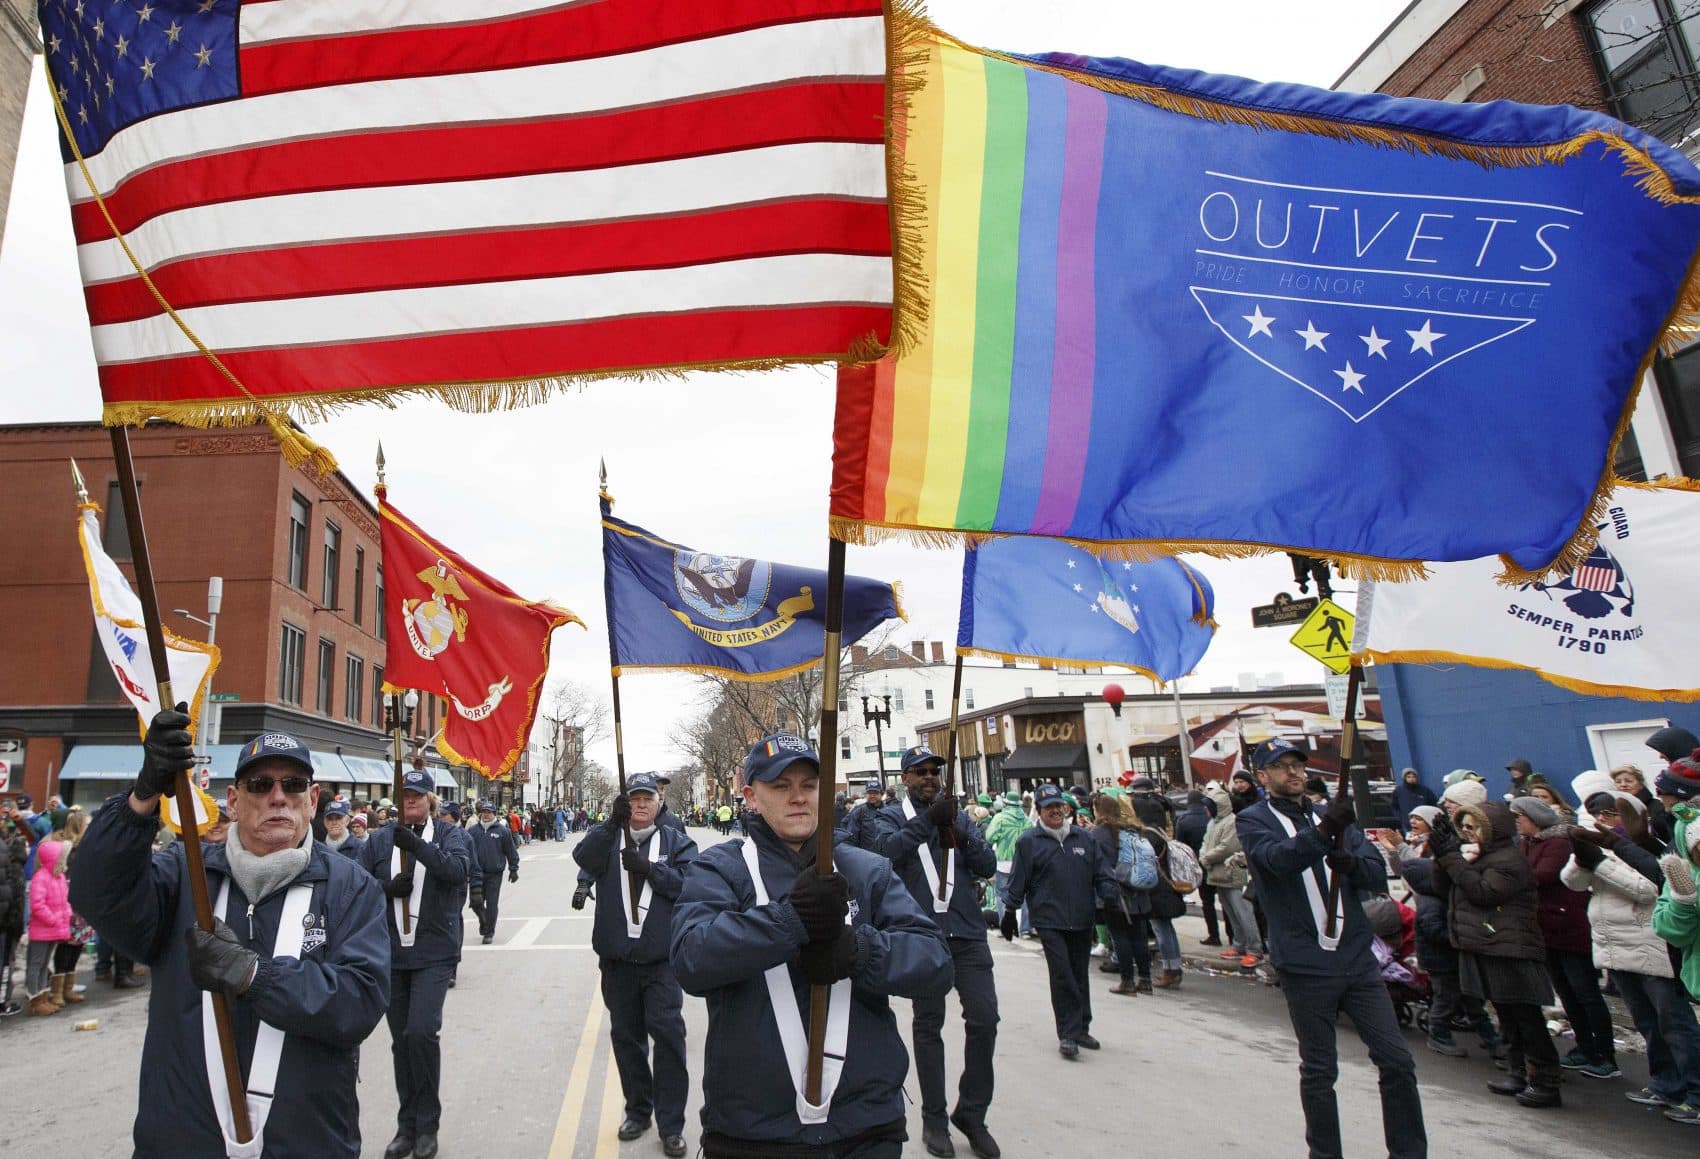 A group from OUTVETS marches in the annual St. Patrick's Day parade in Boston Sunday. (Michael Dwyer/AP)